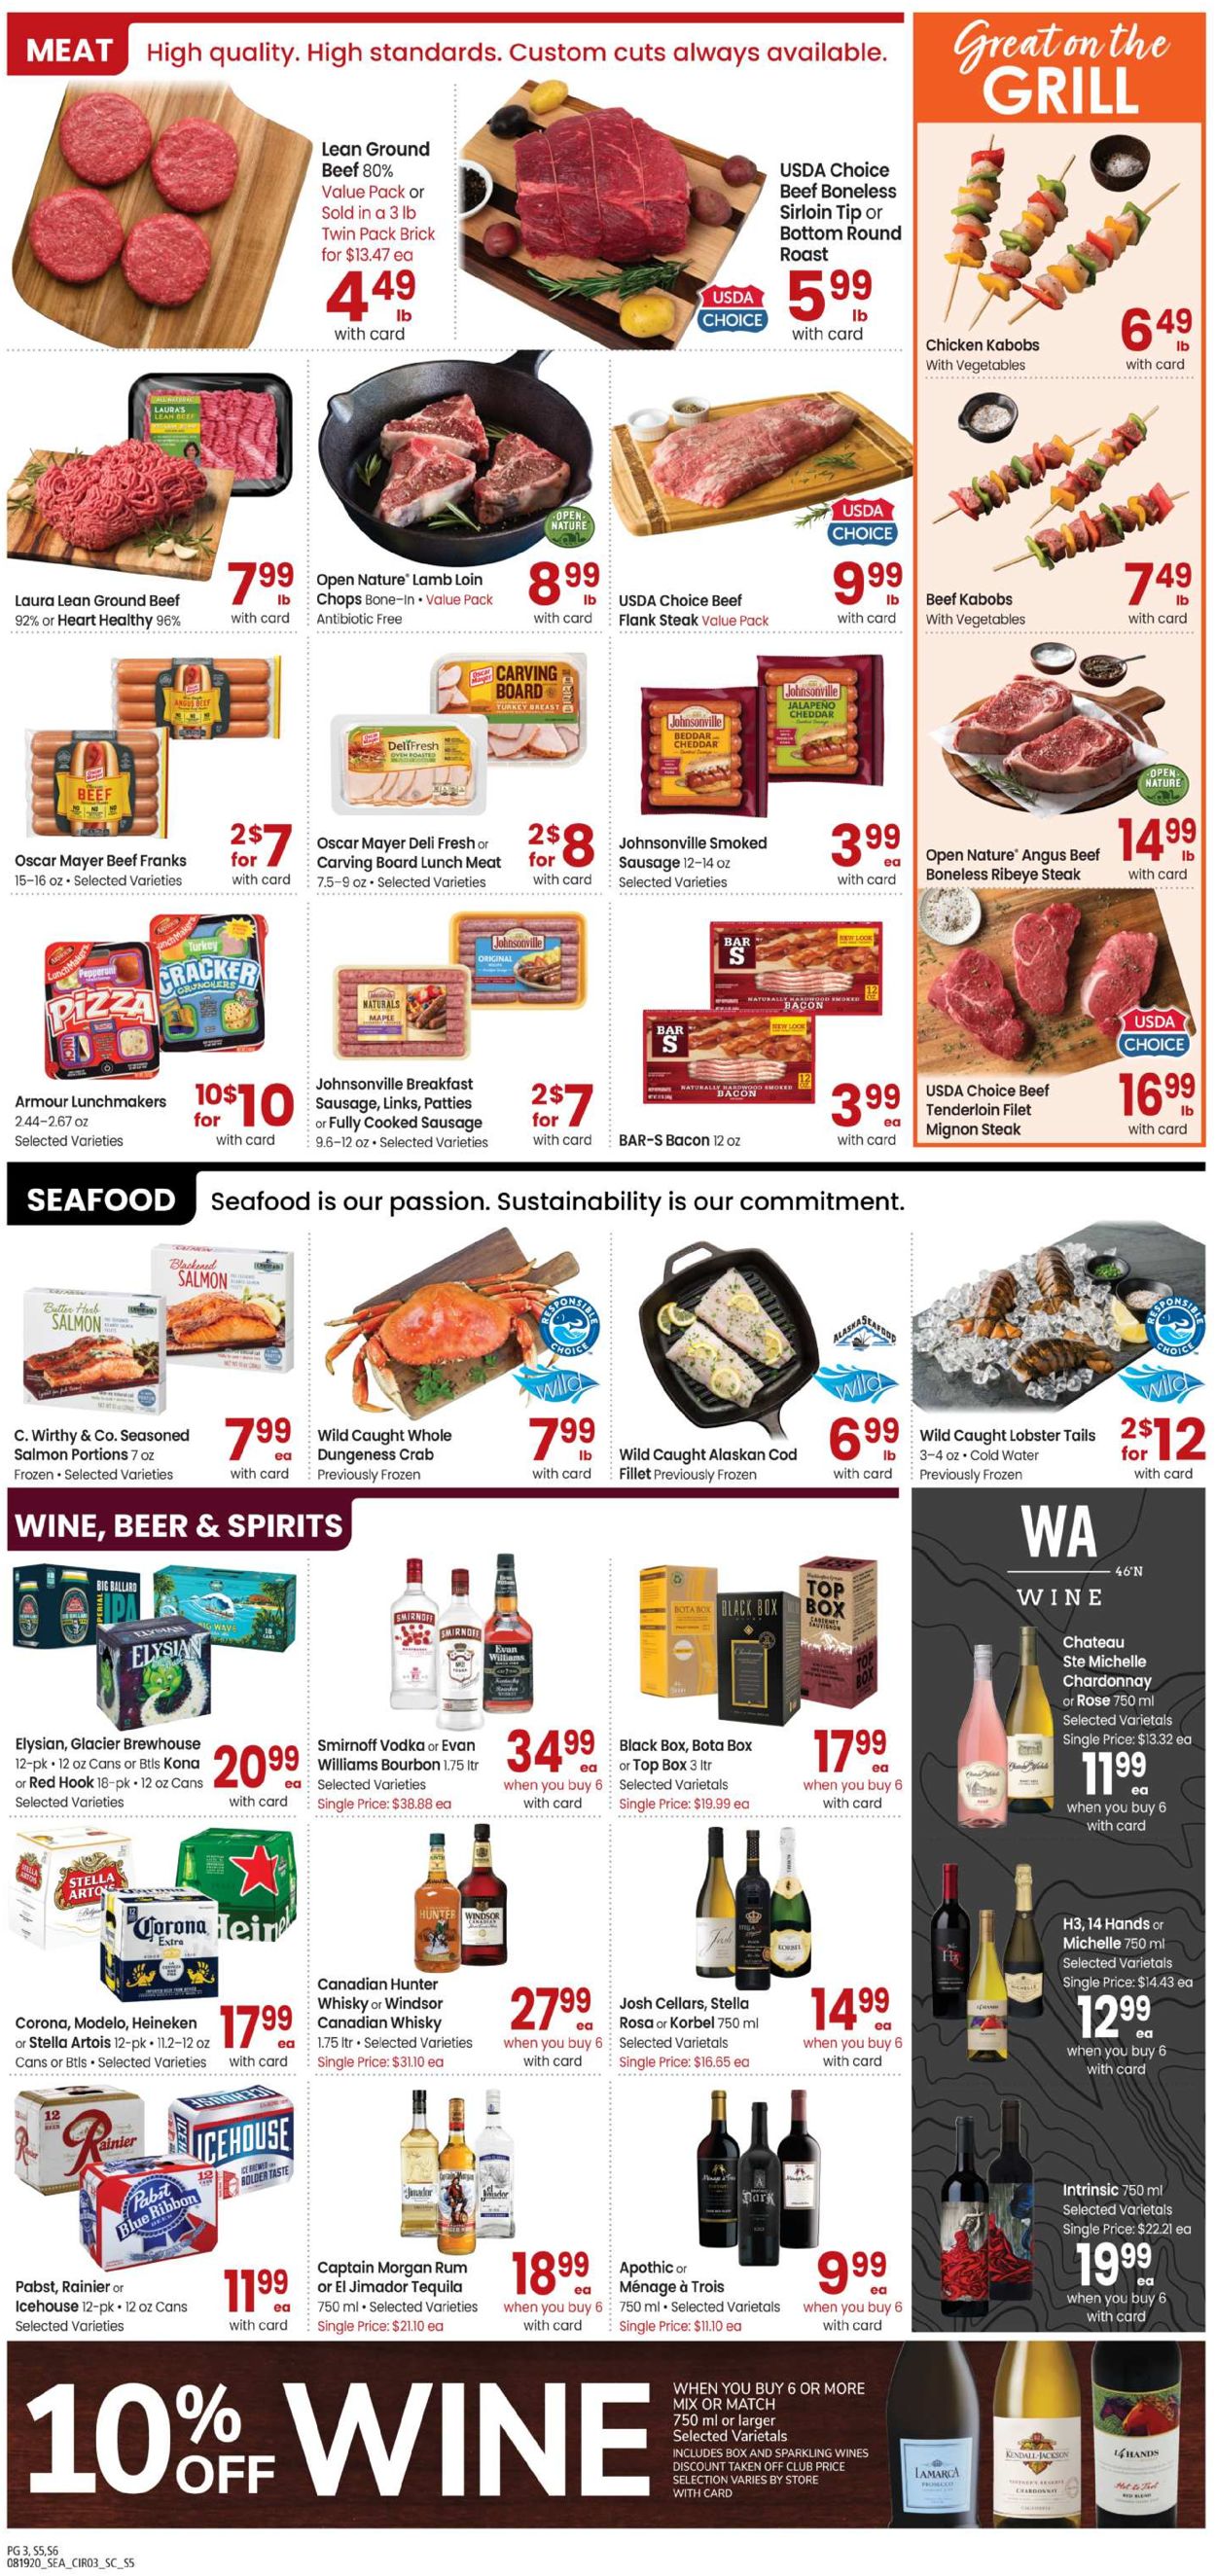 Carrs Ad from 08/19/2020